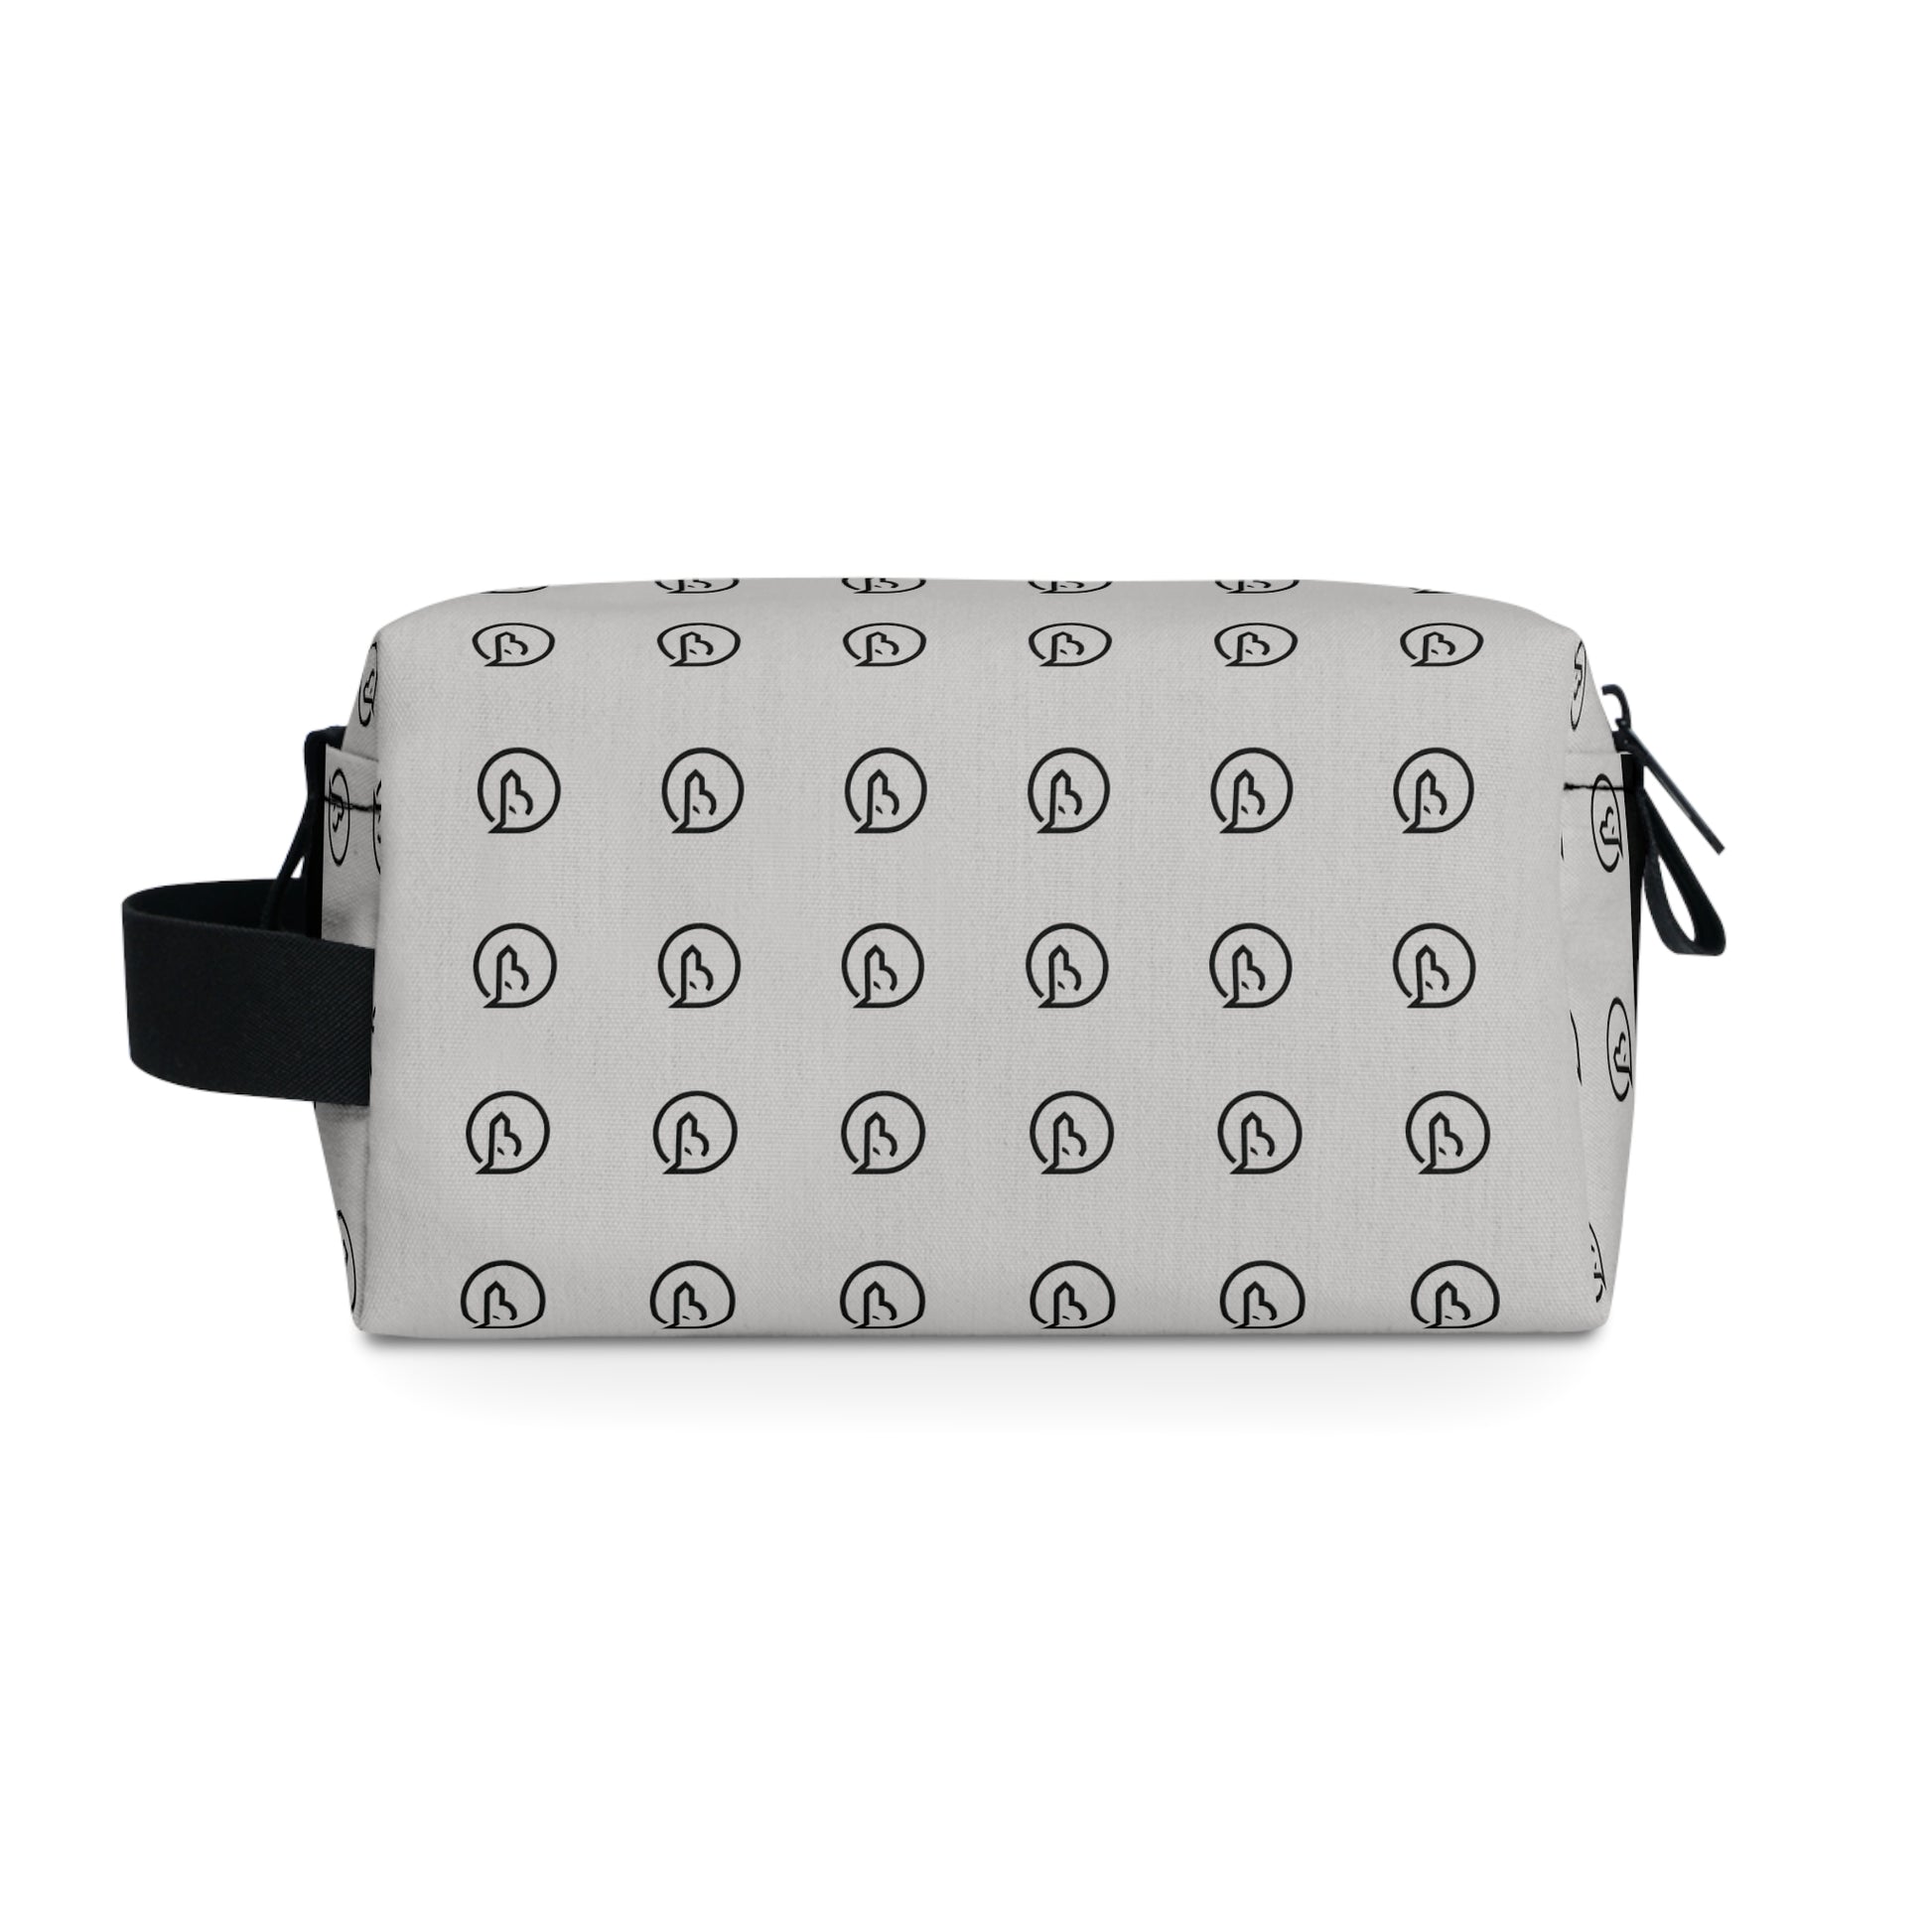 Humble Sportswear, personal use travel pouch, toiletry bags, cosmetic bags, ditty bags